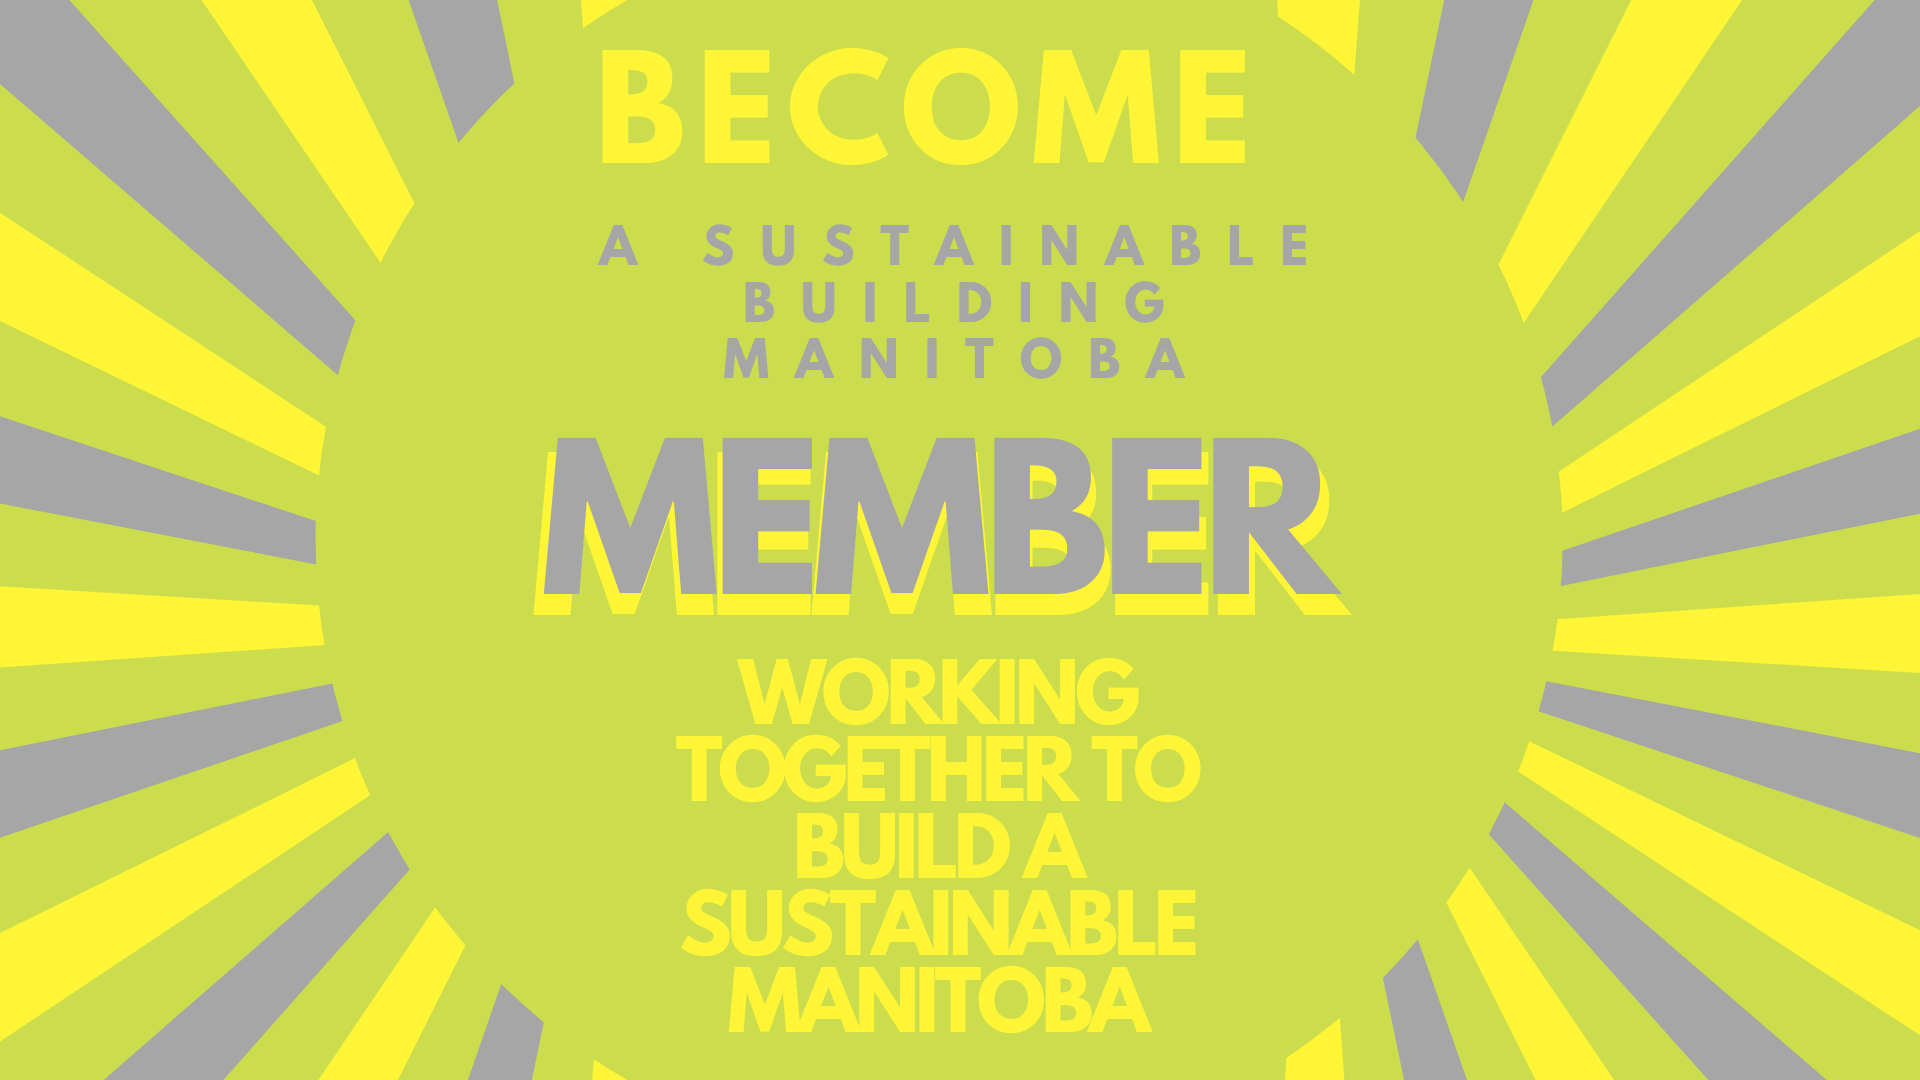 Become a sustainable building Manitoba member working together to build a sustainable Manitoba